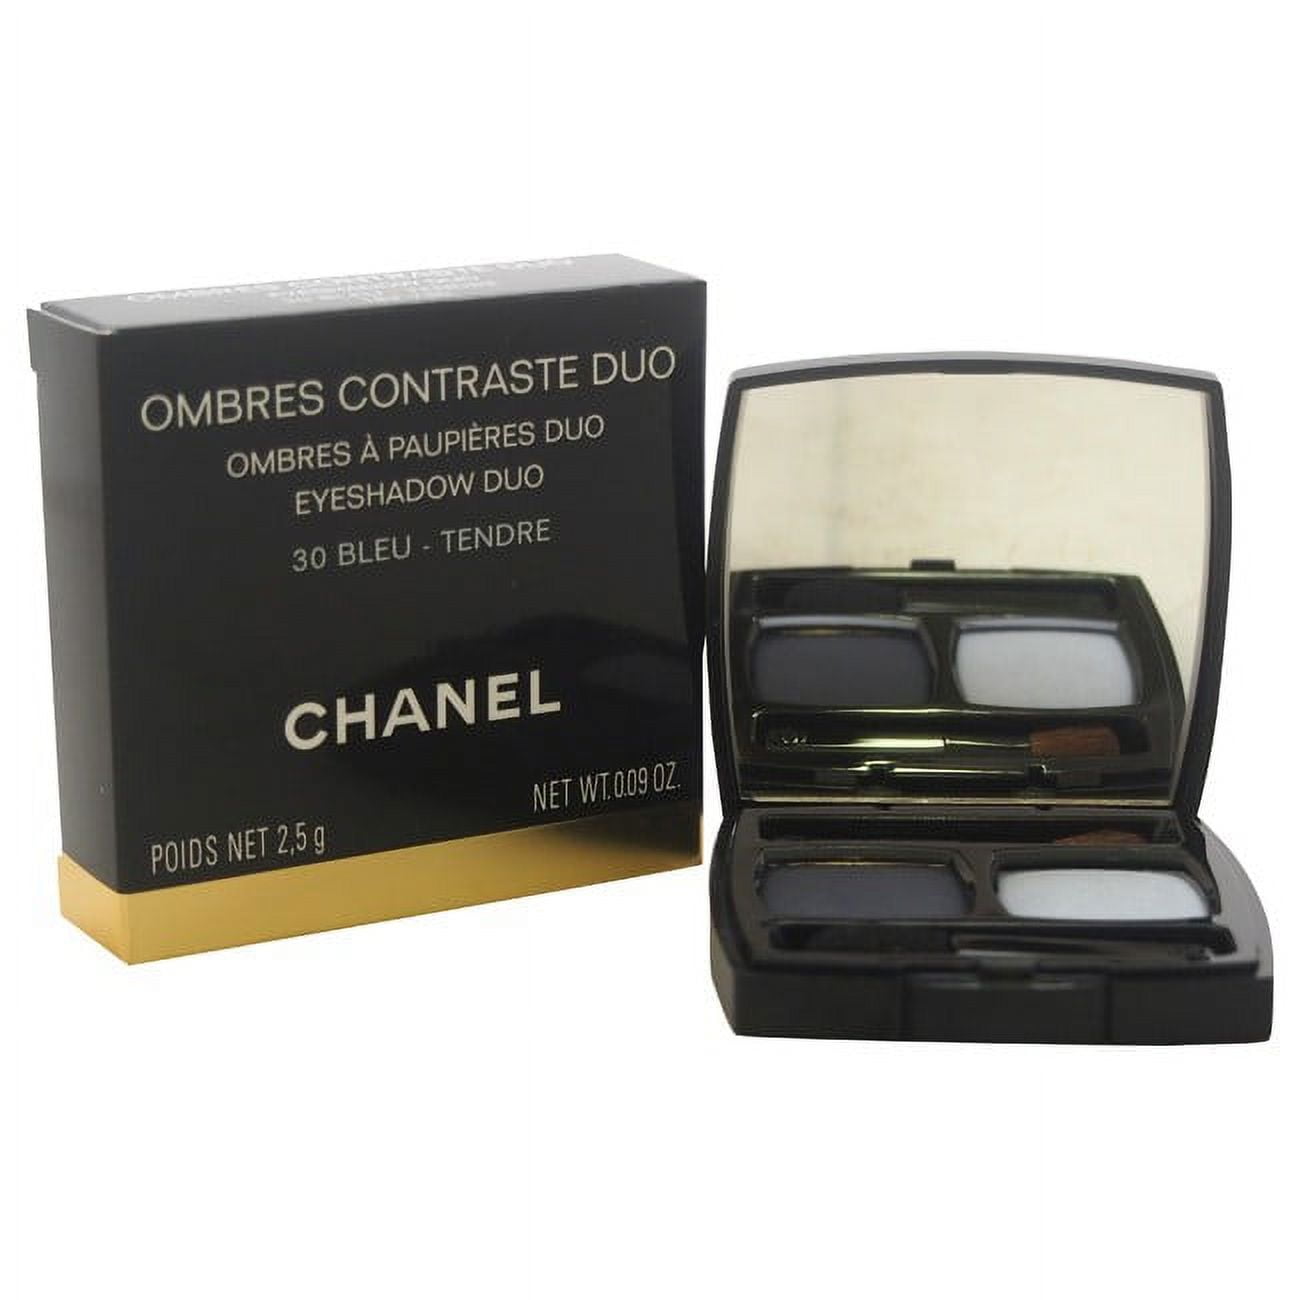 Chanel Ombres Contraste Eyeshadow Duo in Sable and Émouvant